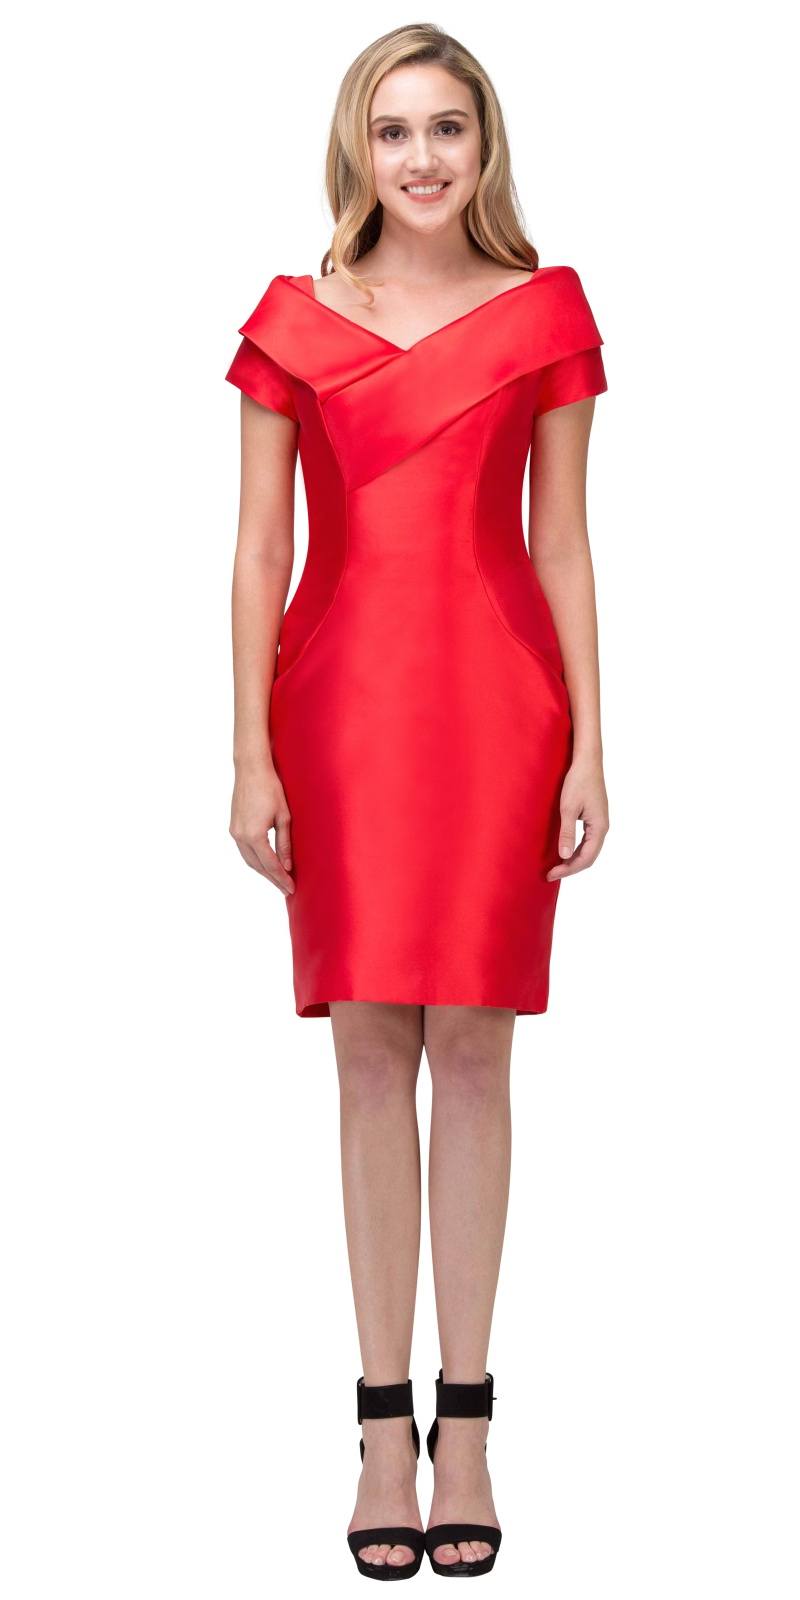 long red dress for wedding guest